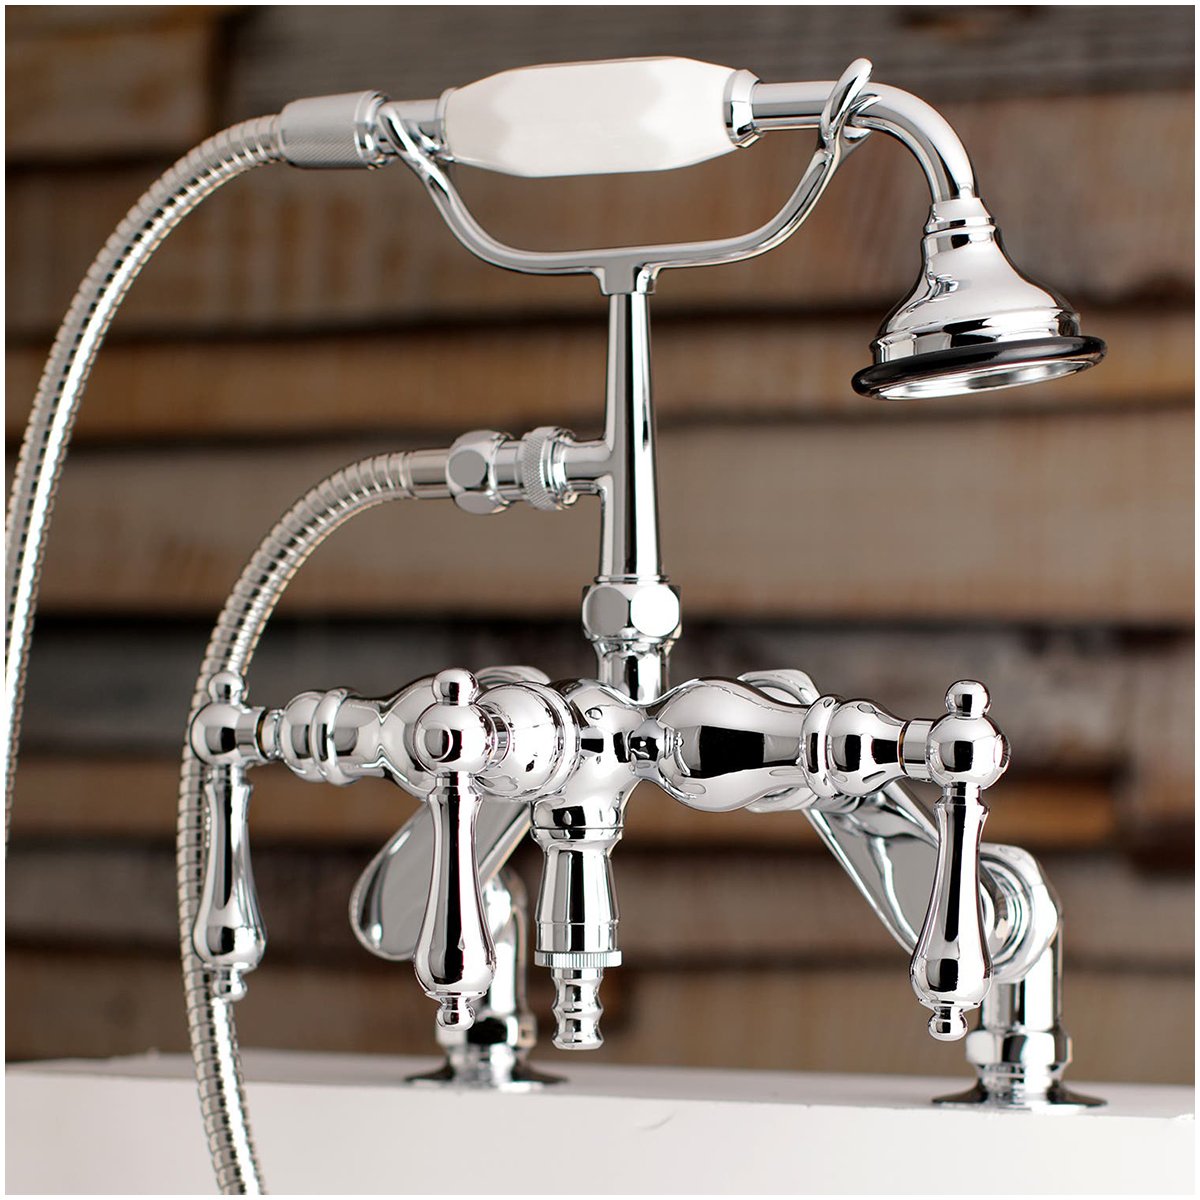 Kingston Brass Aqua Vintage 3-3/8-Inch Adjustable Deck Mount Tub Faucet with Hand Shower in Polished Chrome